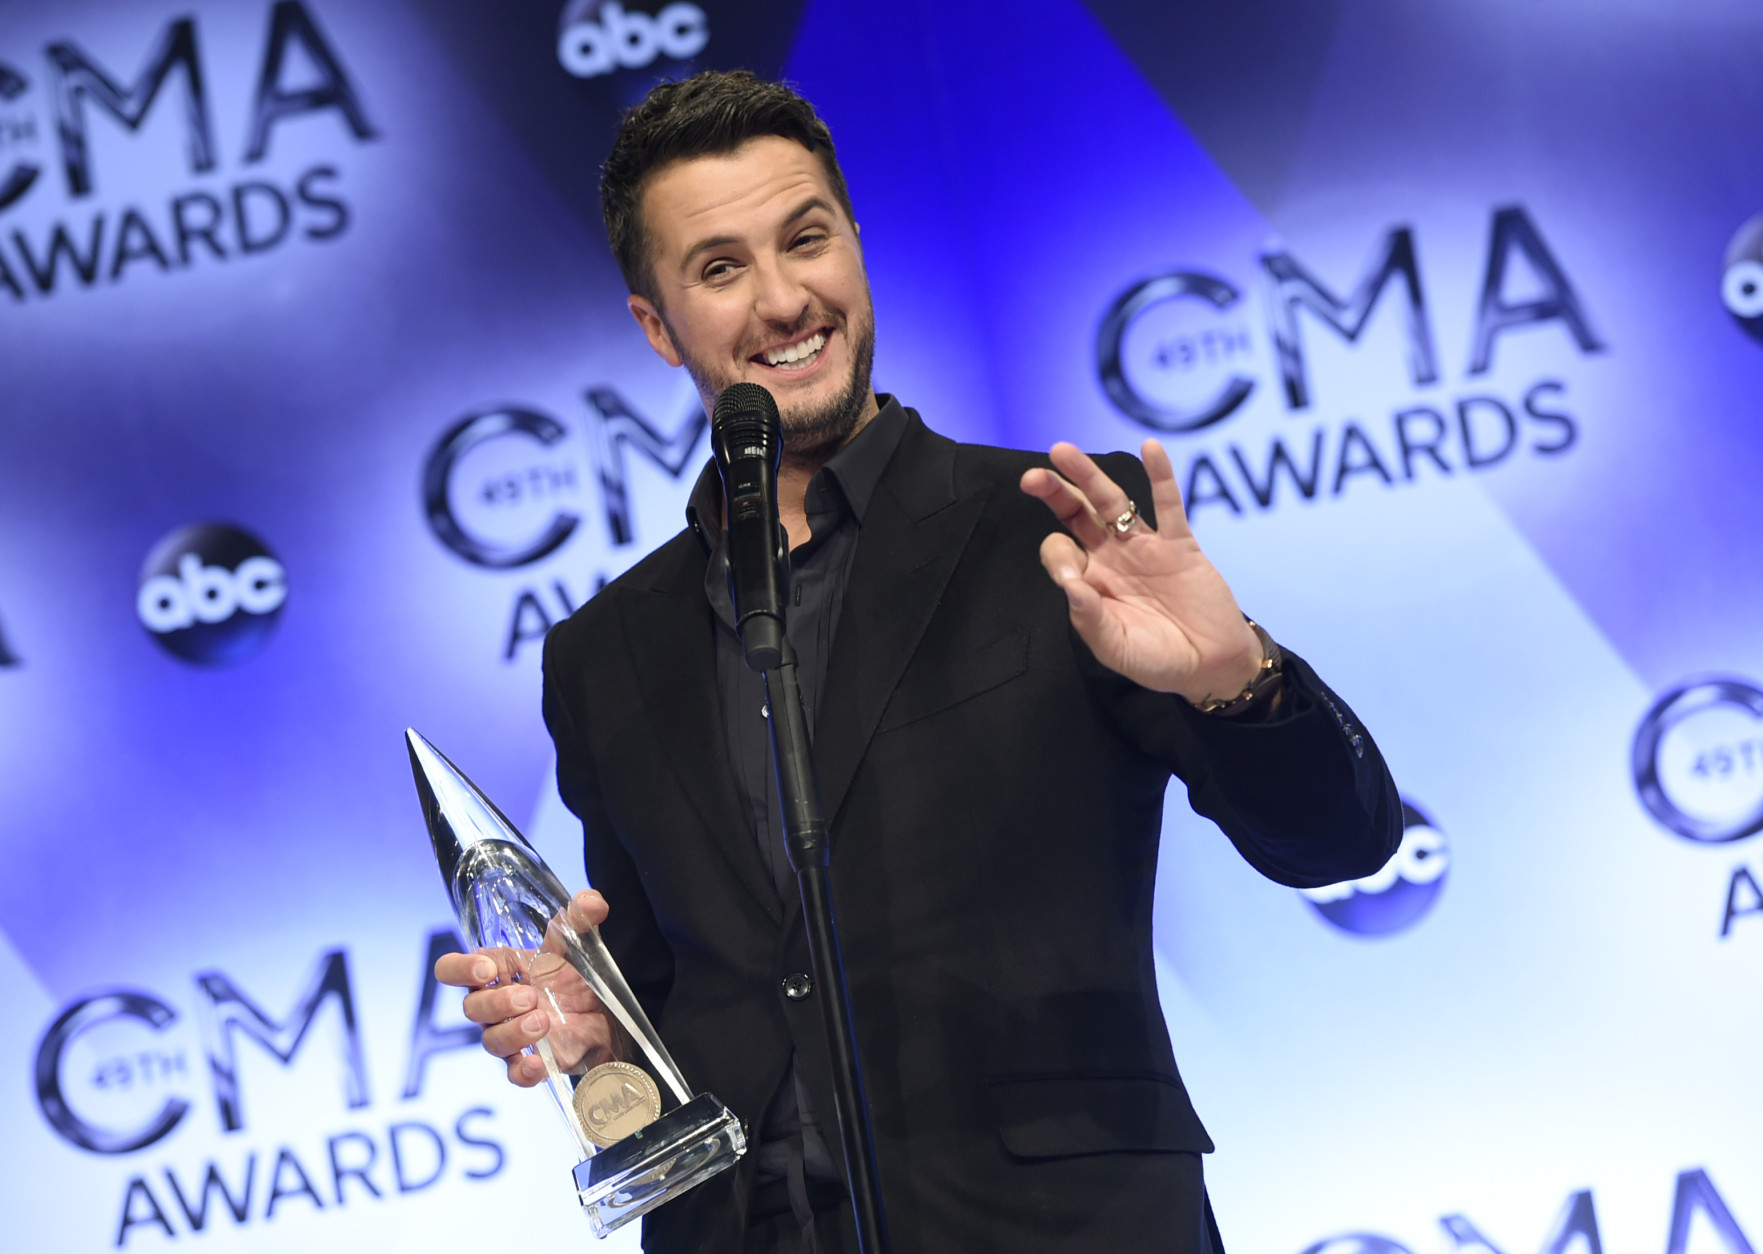 Luke Bryan, winner of the award for entertainer of the year, poses in the press room at the 49th annual CMA Awards at the Bridgestone Arena on Wednesday, Nov. 4, 2015, in Nashville, Tenn. (Photo by Evan Agostini/Invision/AP)